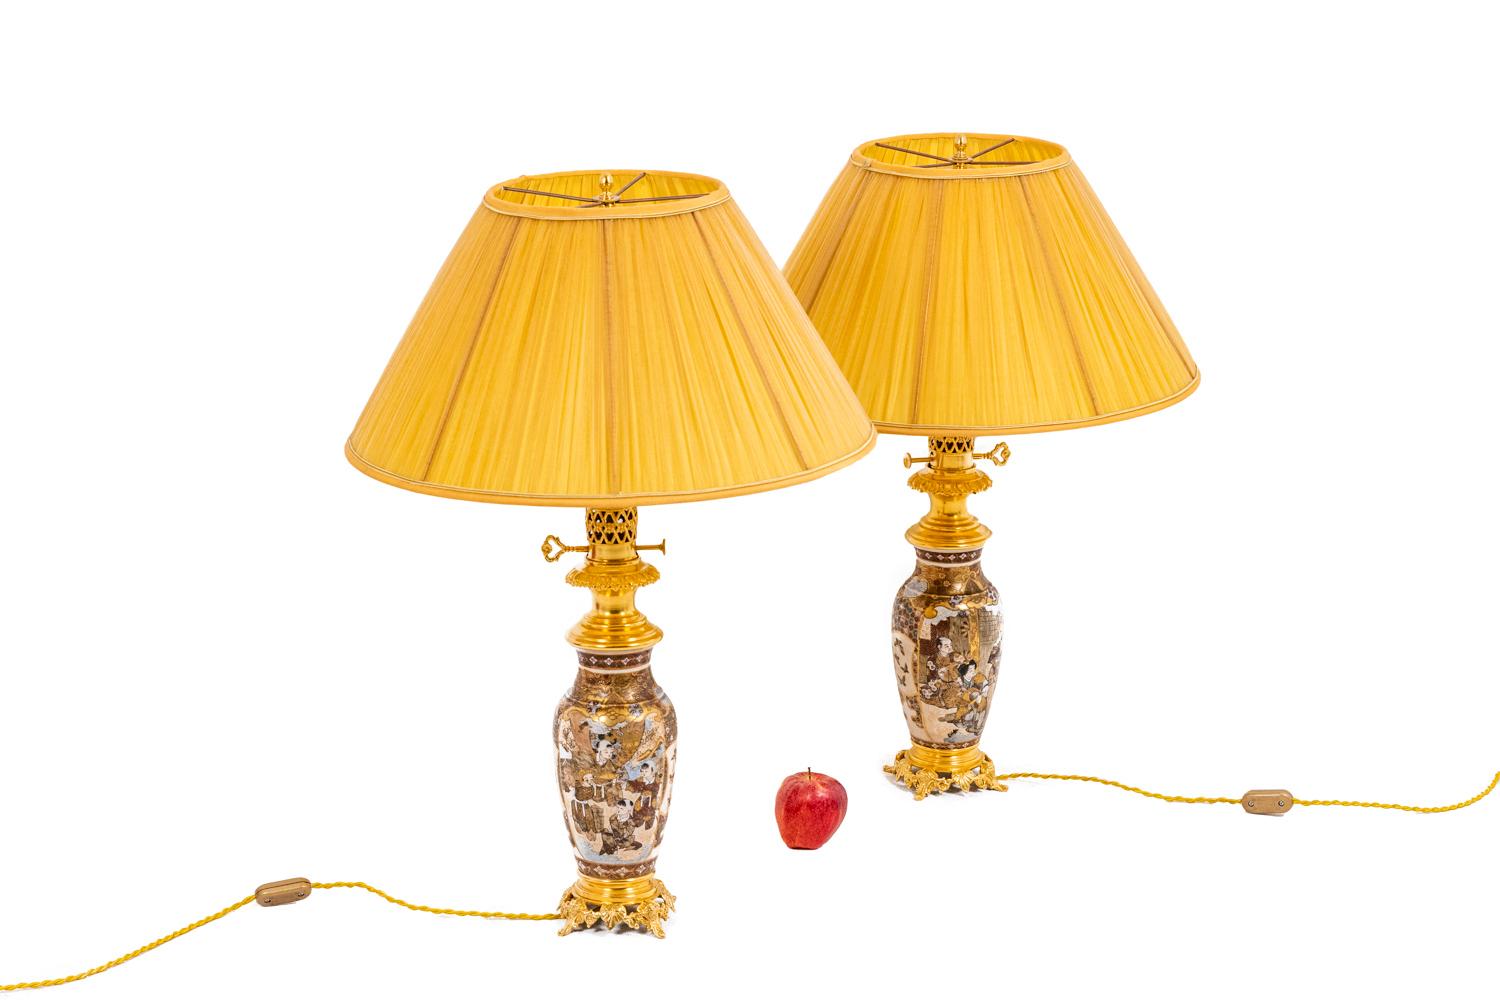 Pair of Lamps in Satsuma Earthenware and Gilt Bronze, circa 1880 For Sale 6